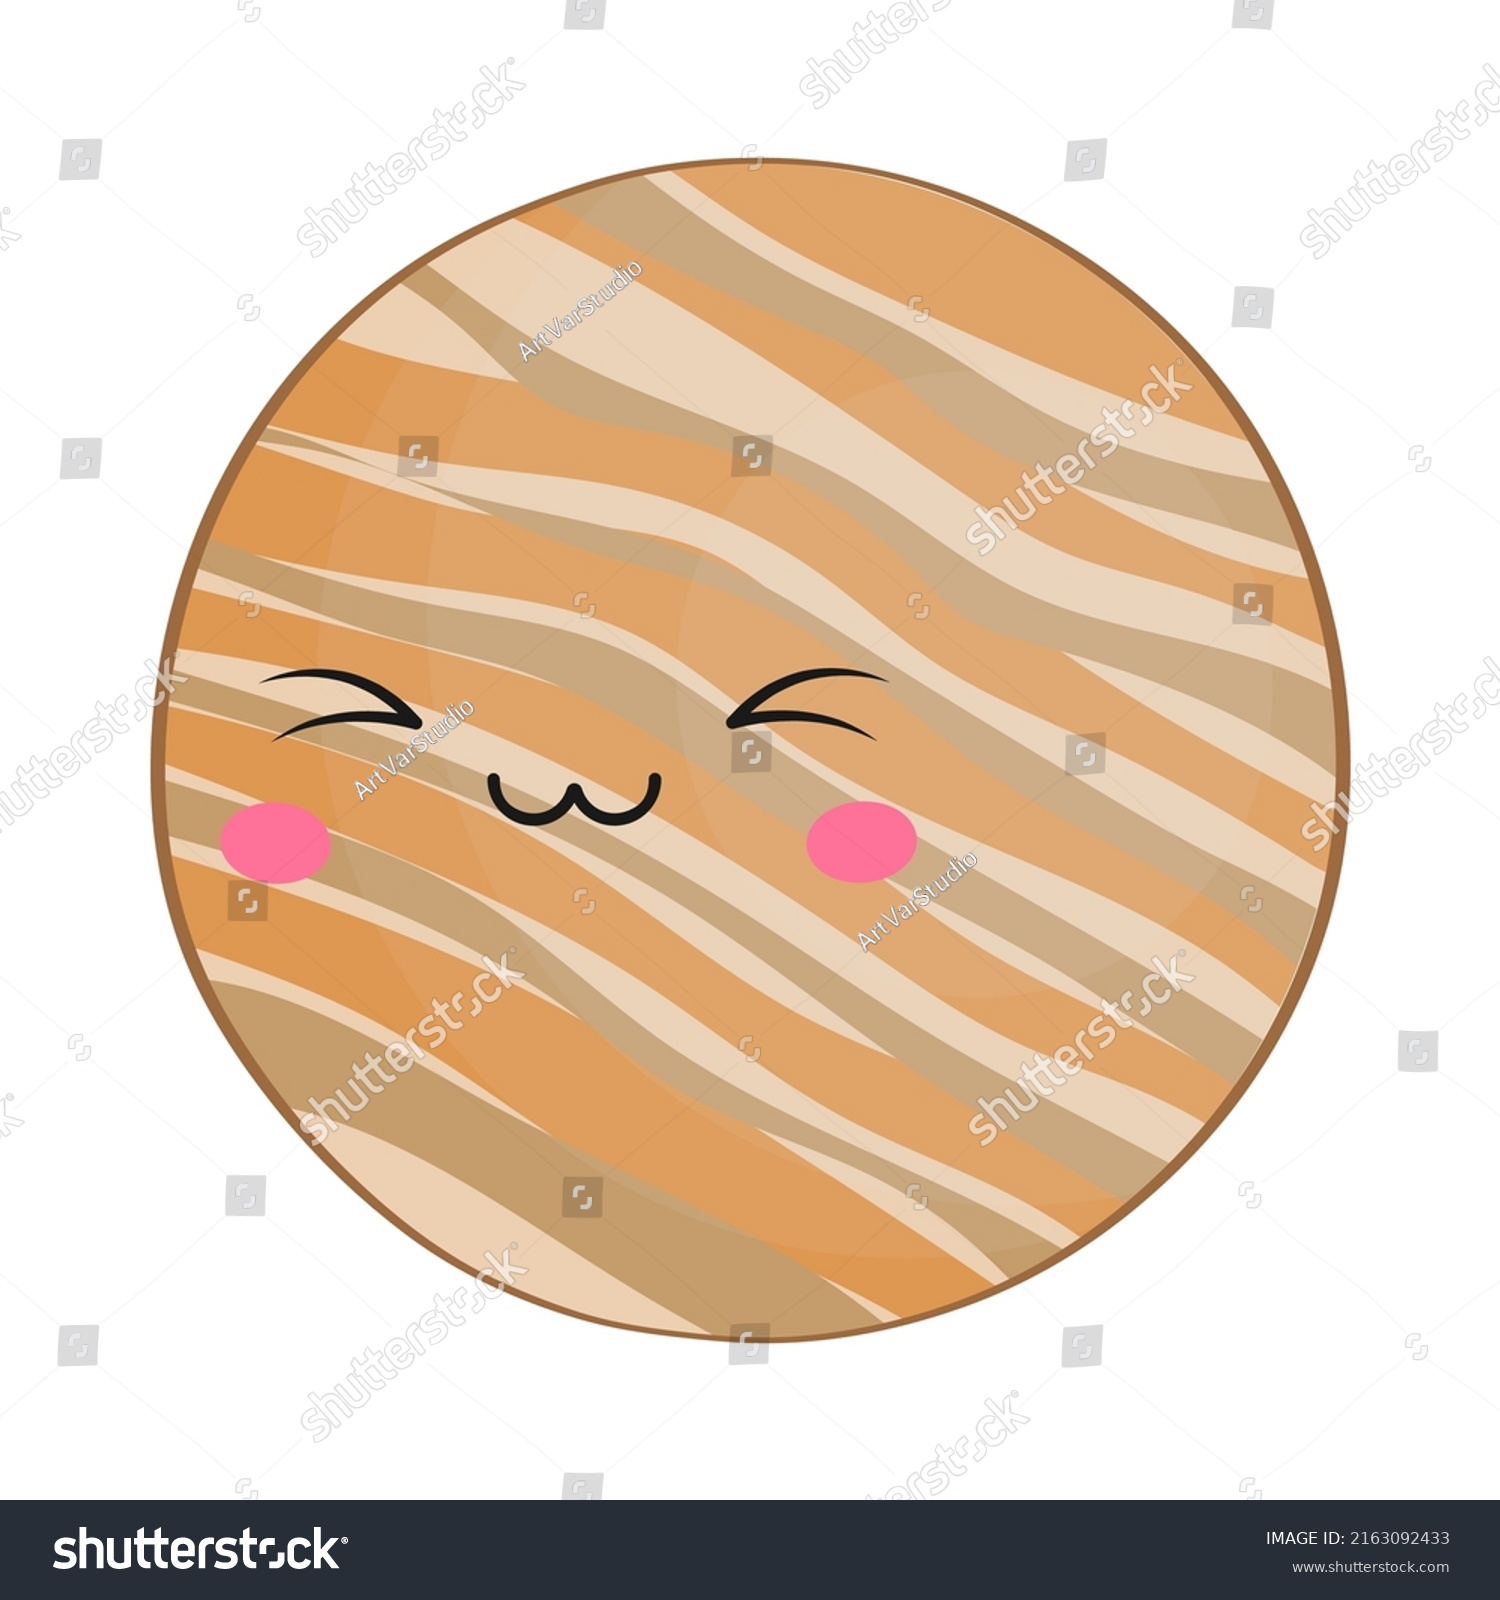 SVG of Cute kawaii planet Jupiter Vector illustration of a planet. Picture of planet for kids, baby book, fairy tales, covers, baby shower invitation, textile t-shirt.
 svg